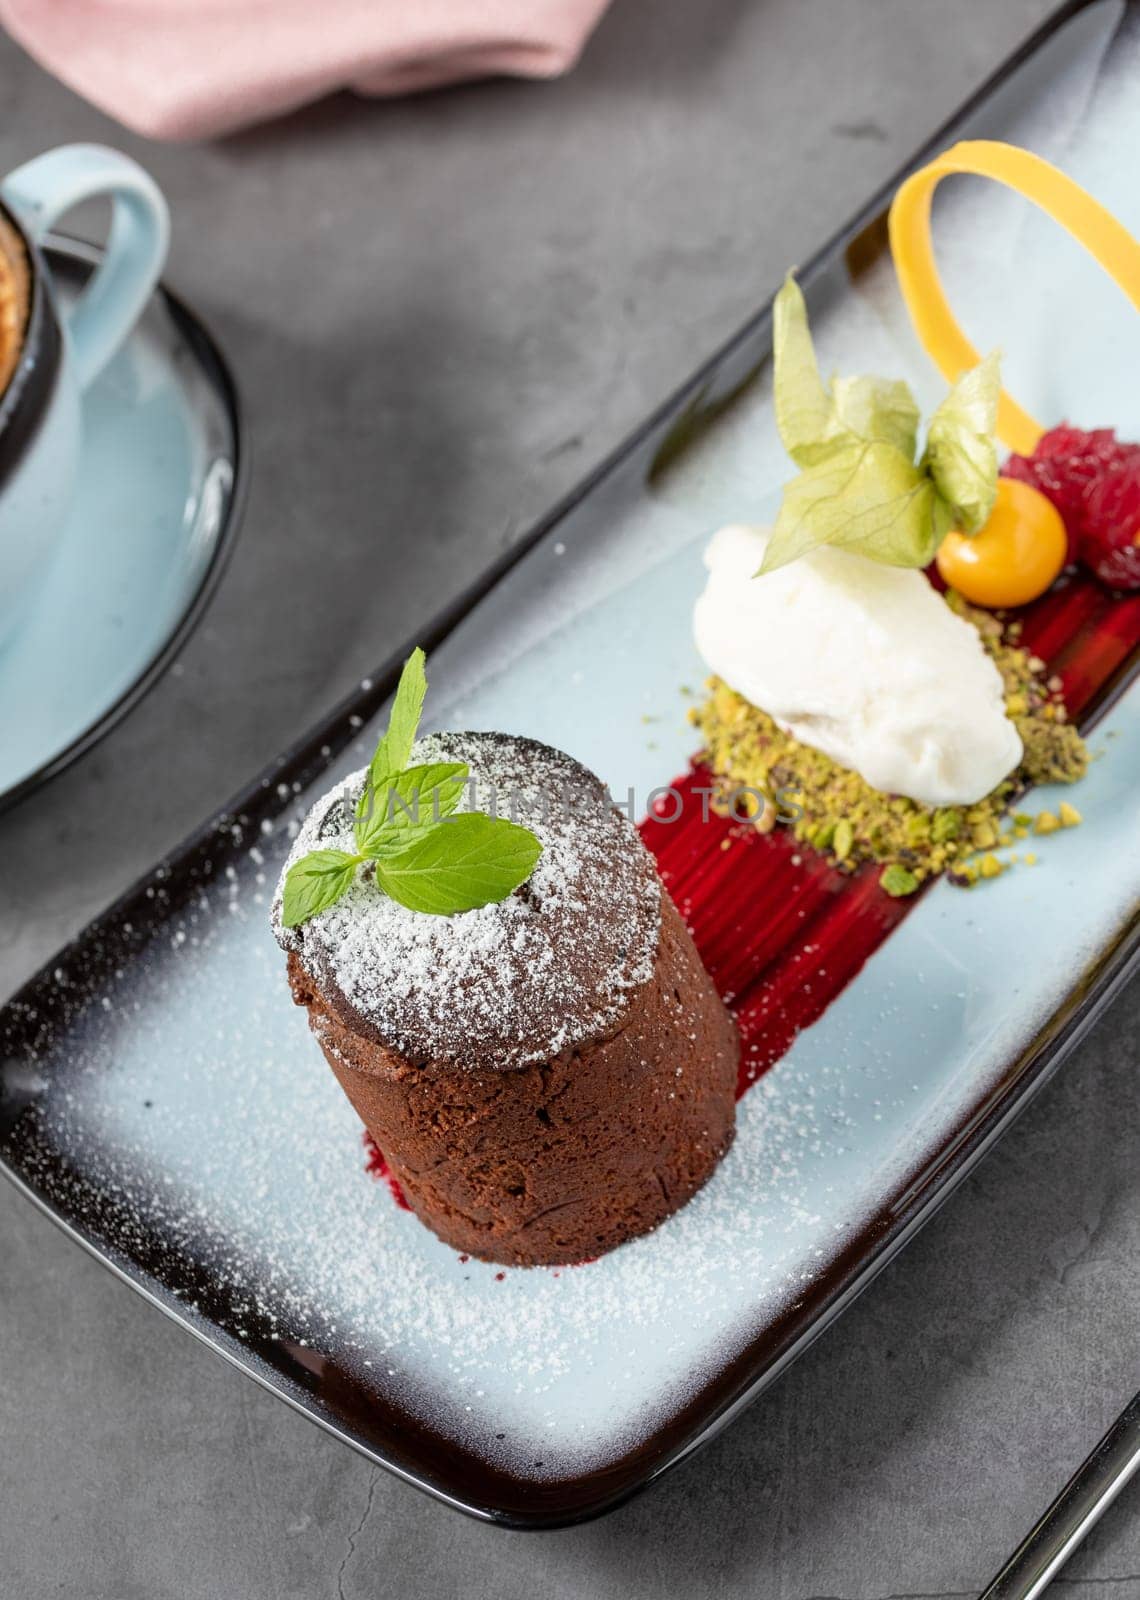 Chocolate souffle with ice cream served in a fine dining restaurant